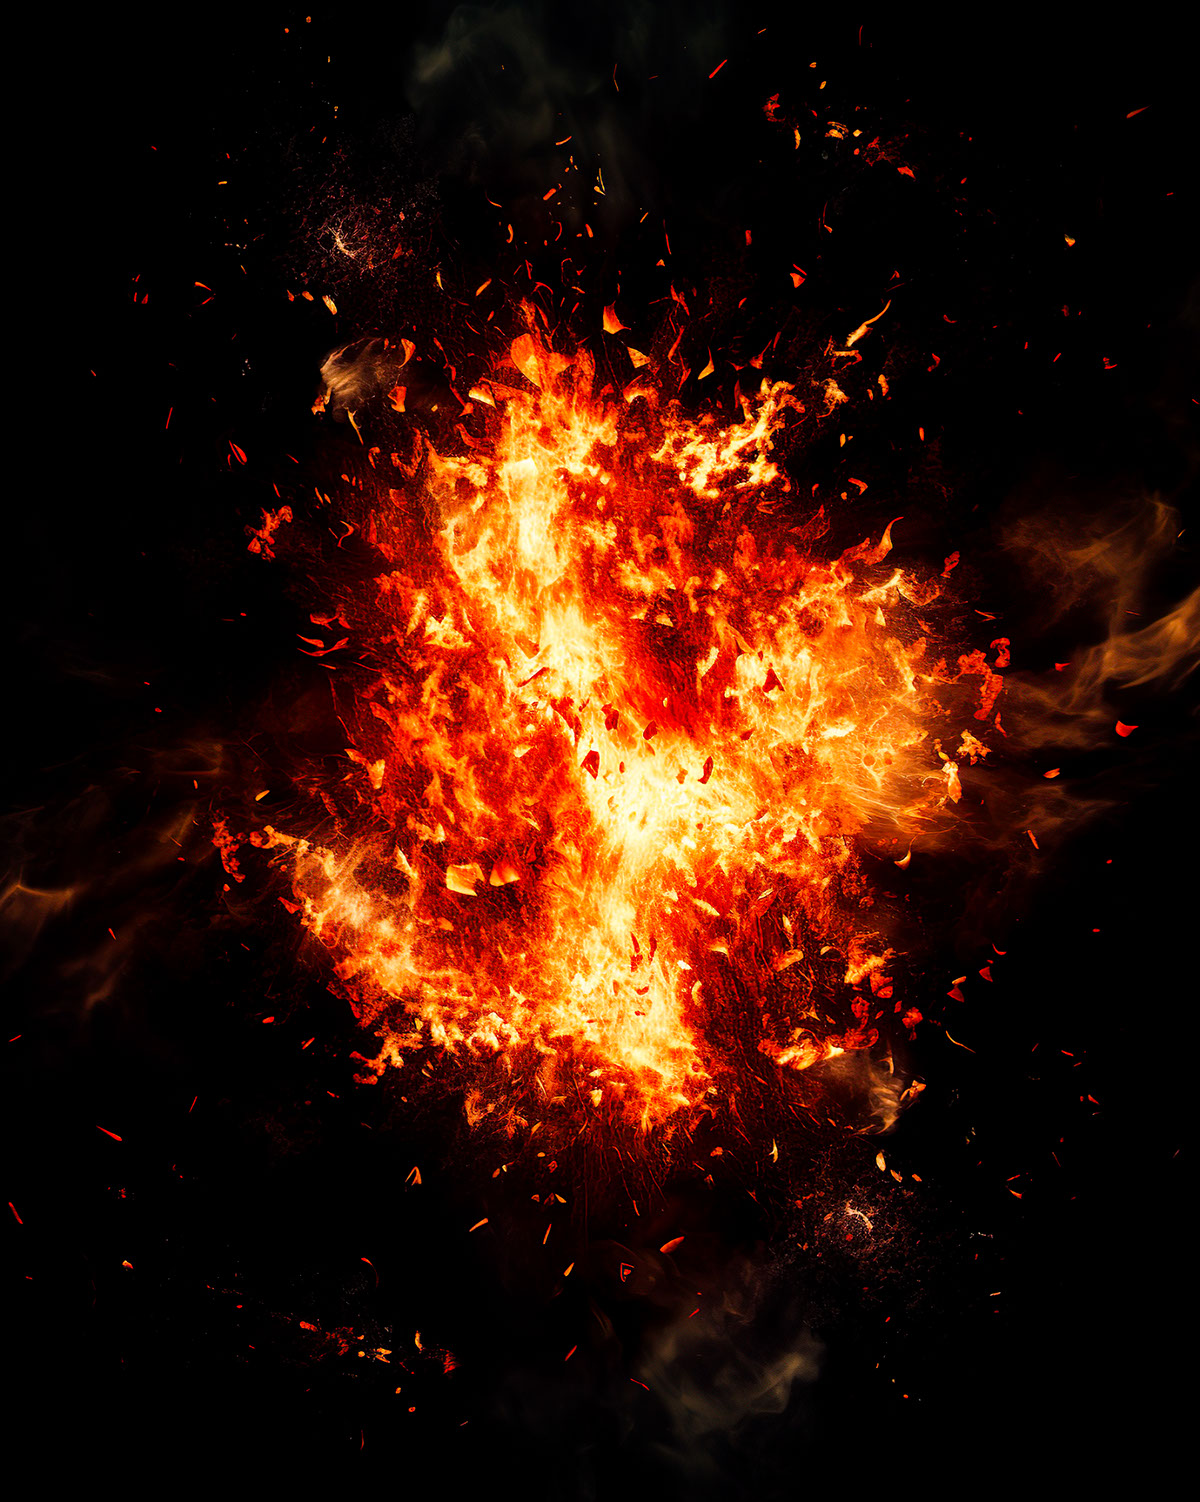 Fire rendition image